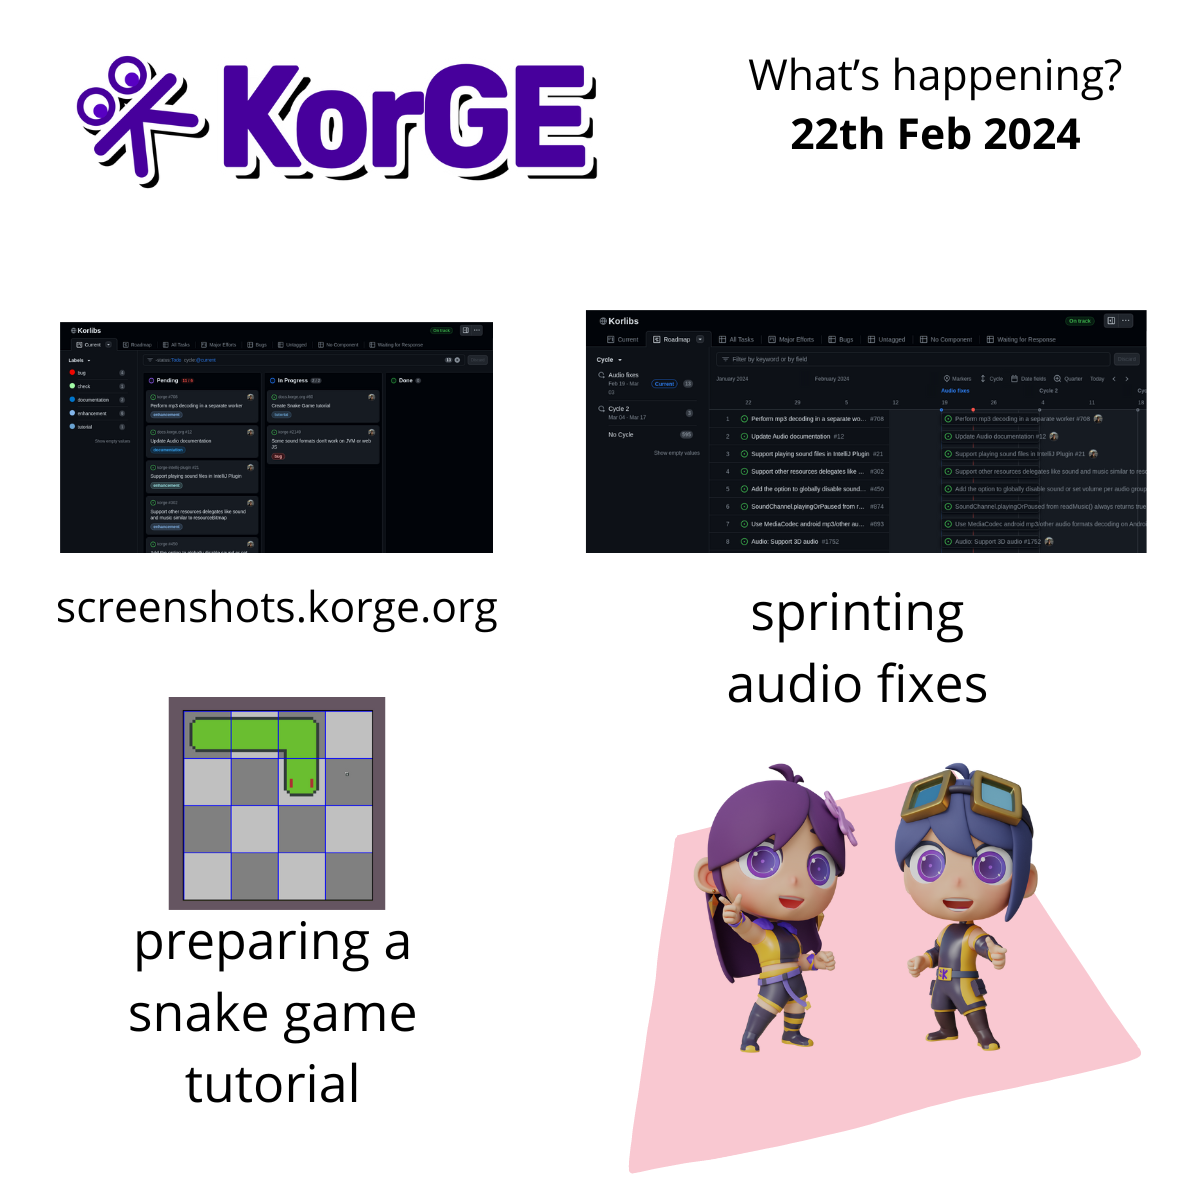 What's happening with KorGE 22th Feb 2024